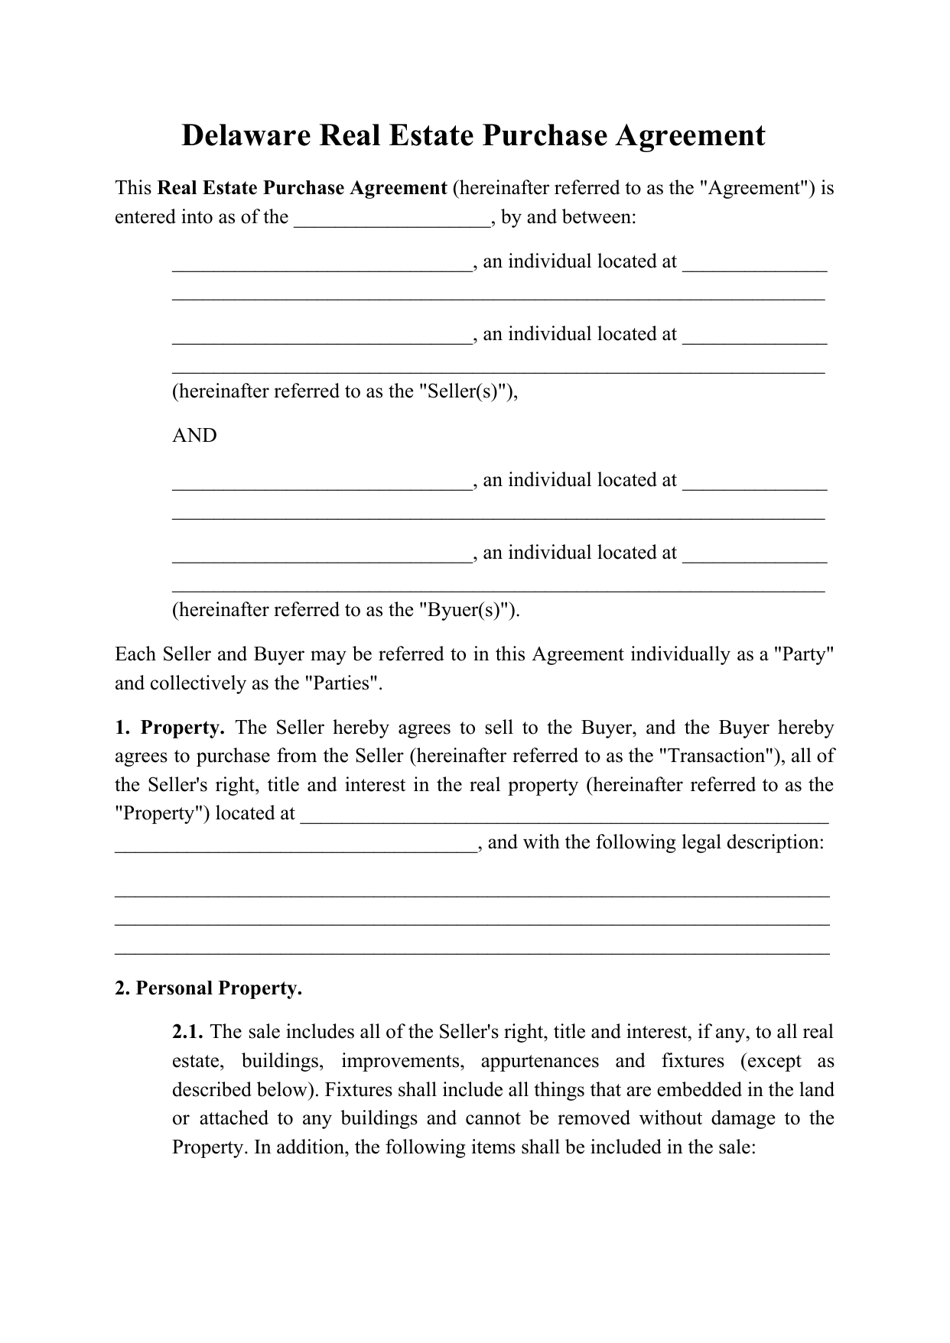 Real Estate Purchase Agreement Template - Delaware, Page 1